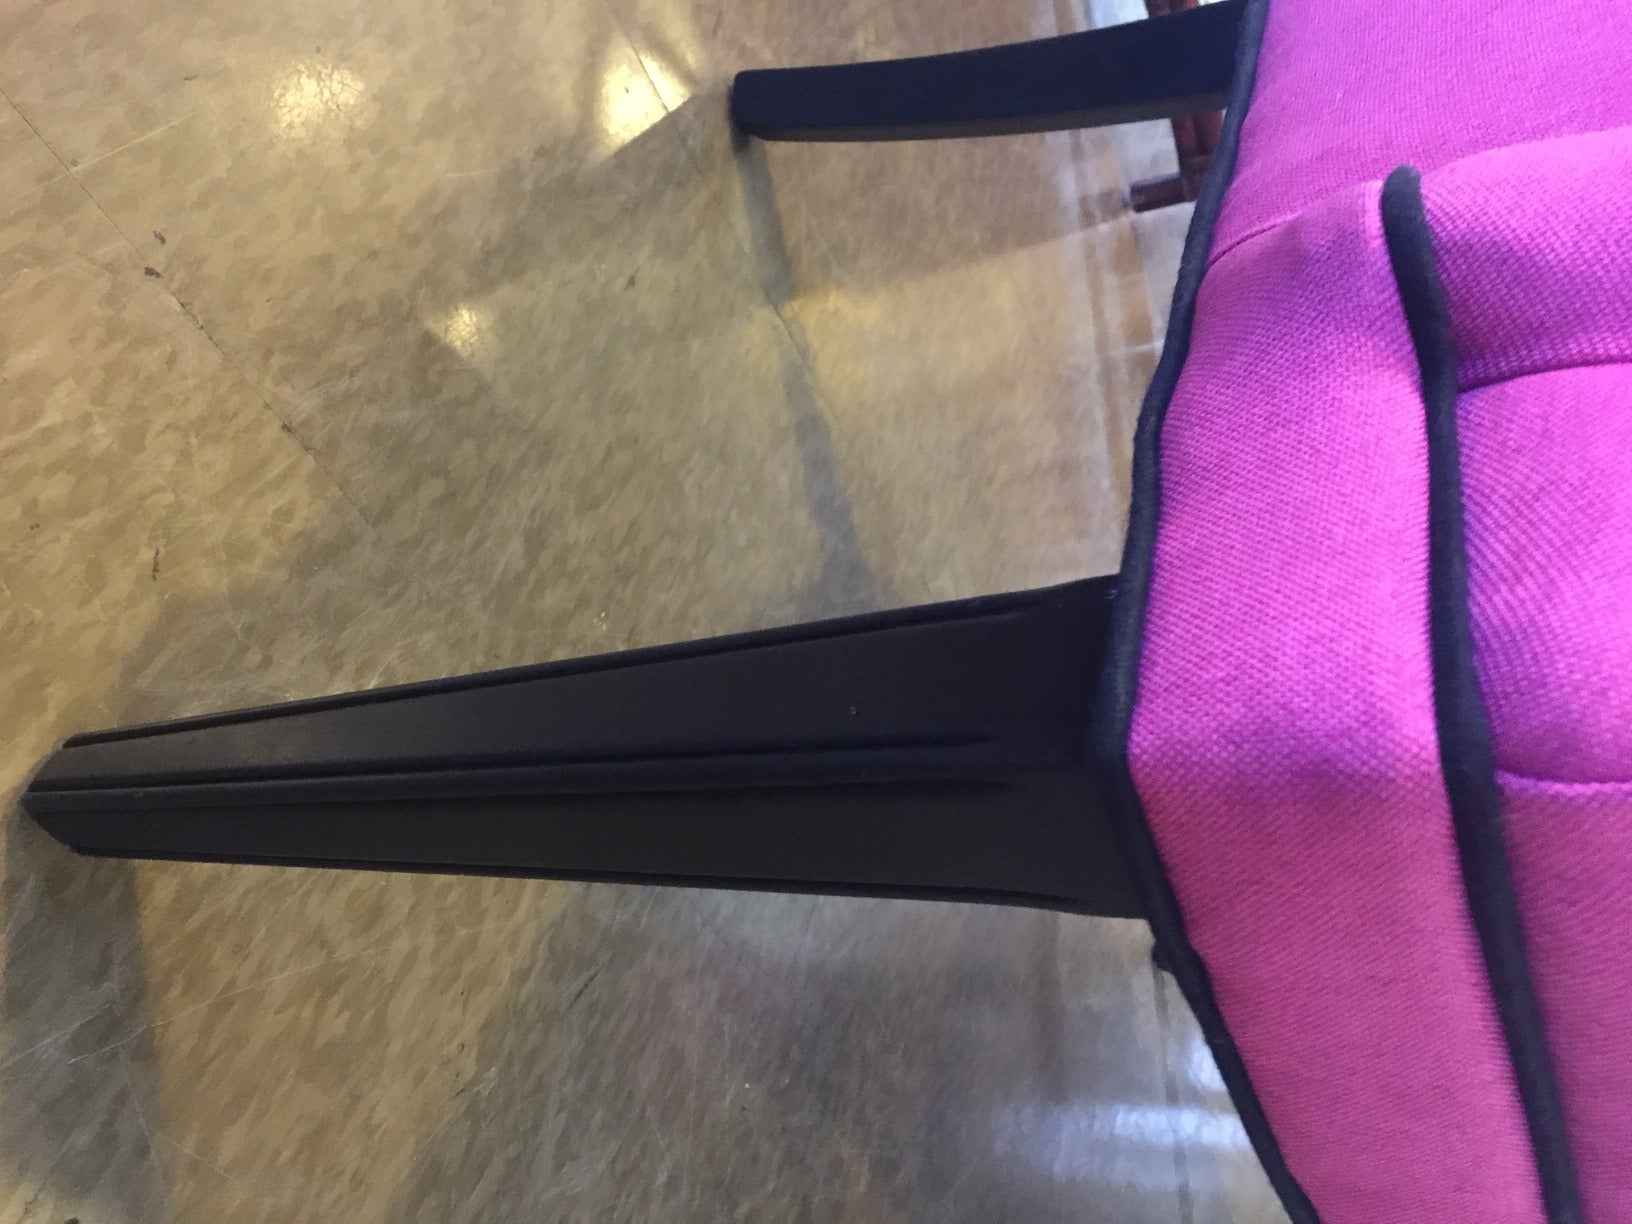 These vintage chairs have been reupholstered in a hot pink heavy linen with reinforced backing to retain the shape and keep this chair beautiful. It is corded in black linen and the legs and arm pieces have been professionally lacquered in black